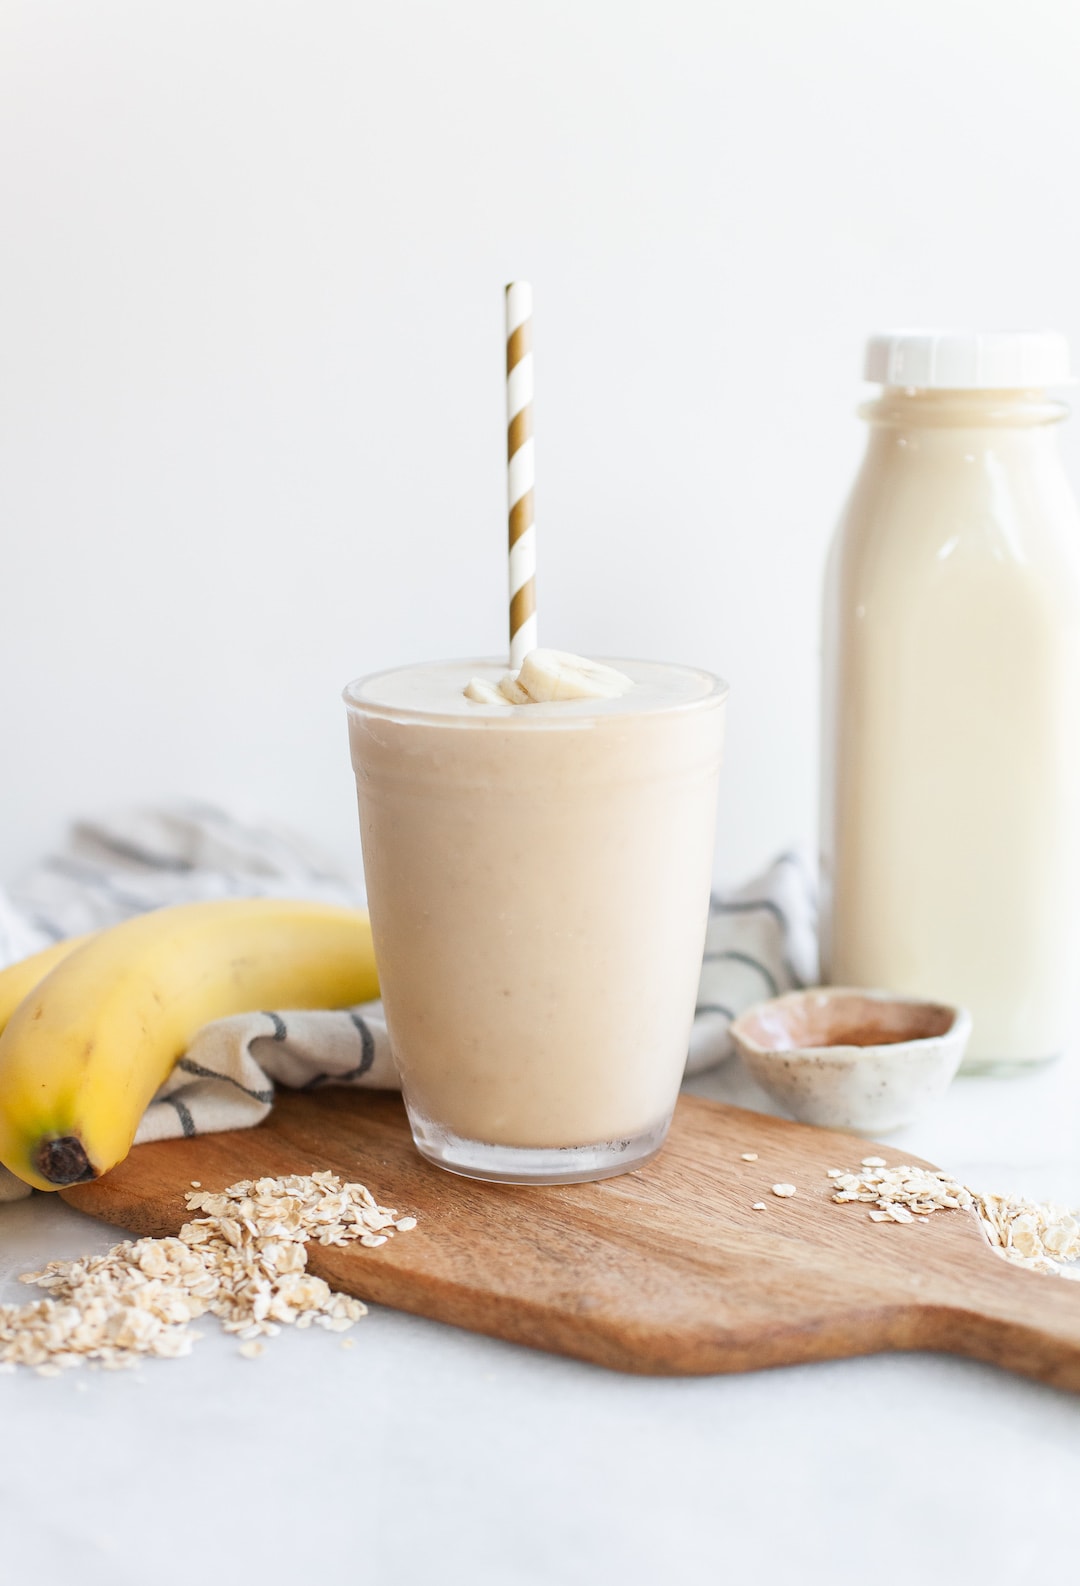 image of an oat milk smoothie on a wood board with bananas, oats, and a carafe of oat milk on the side